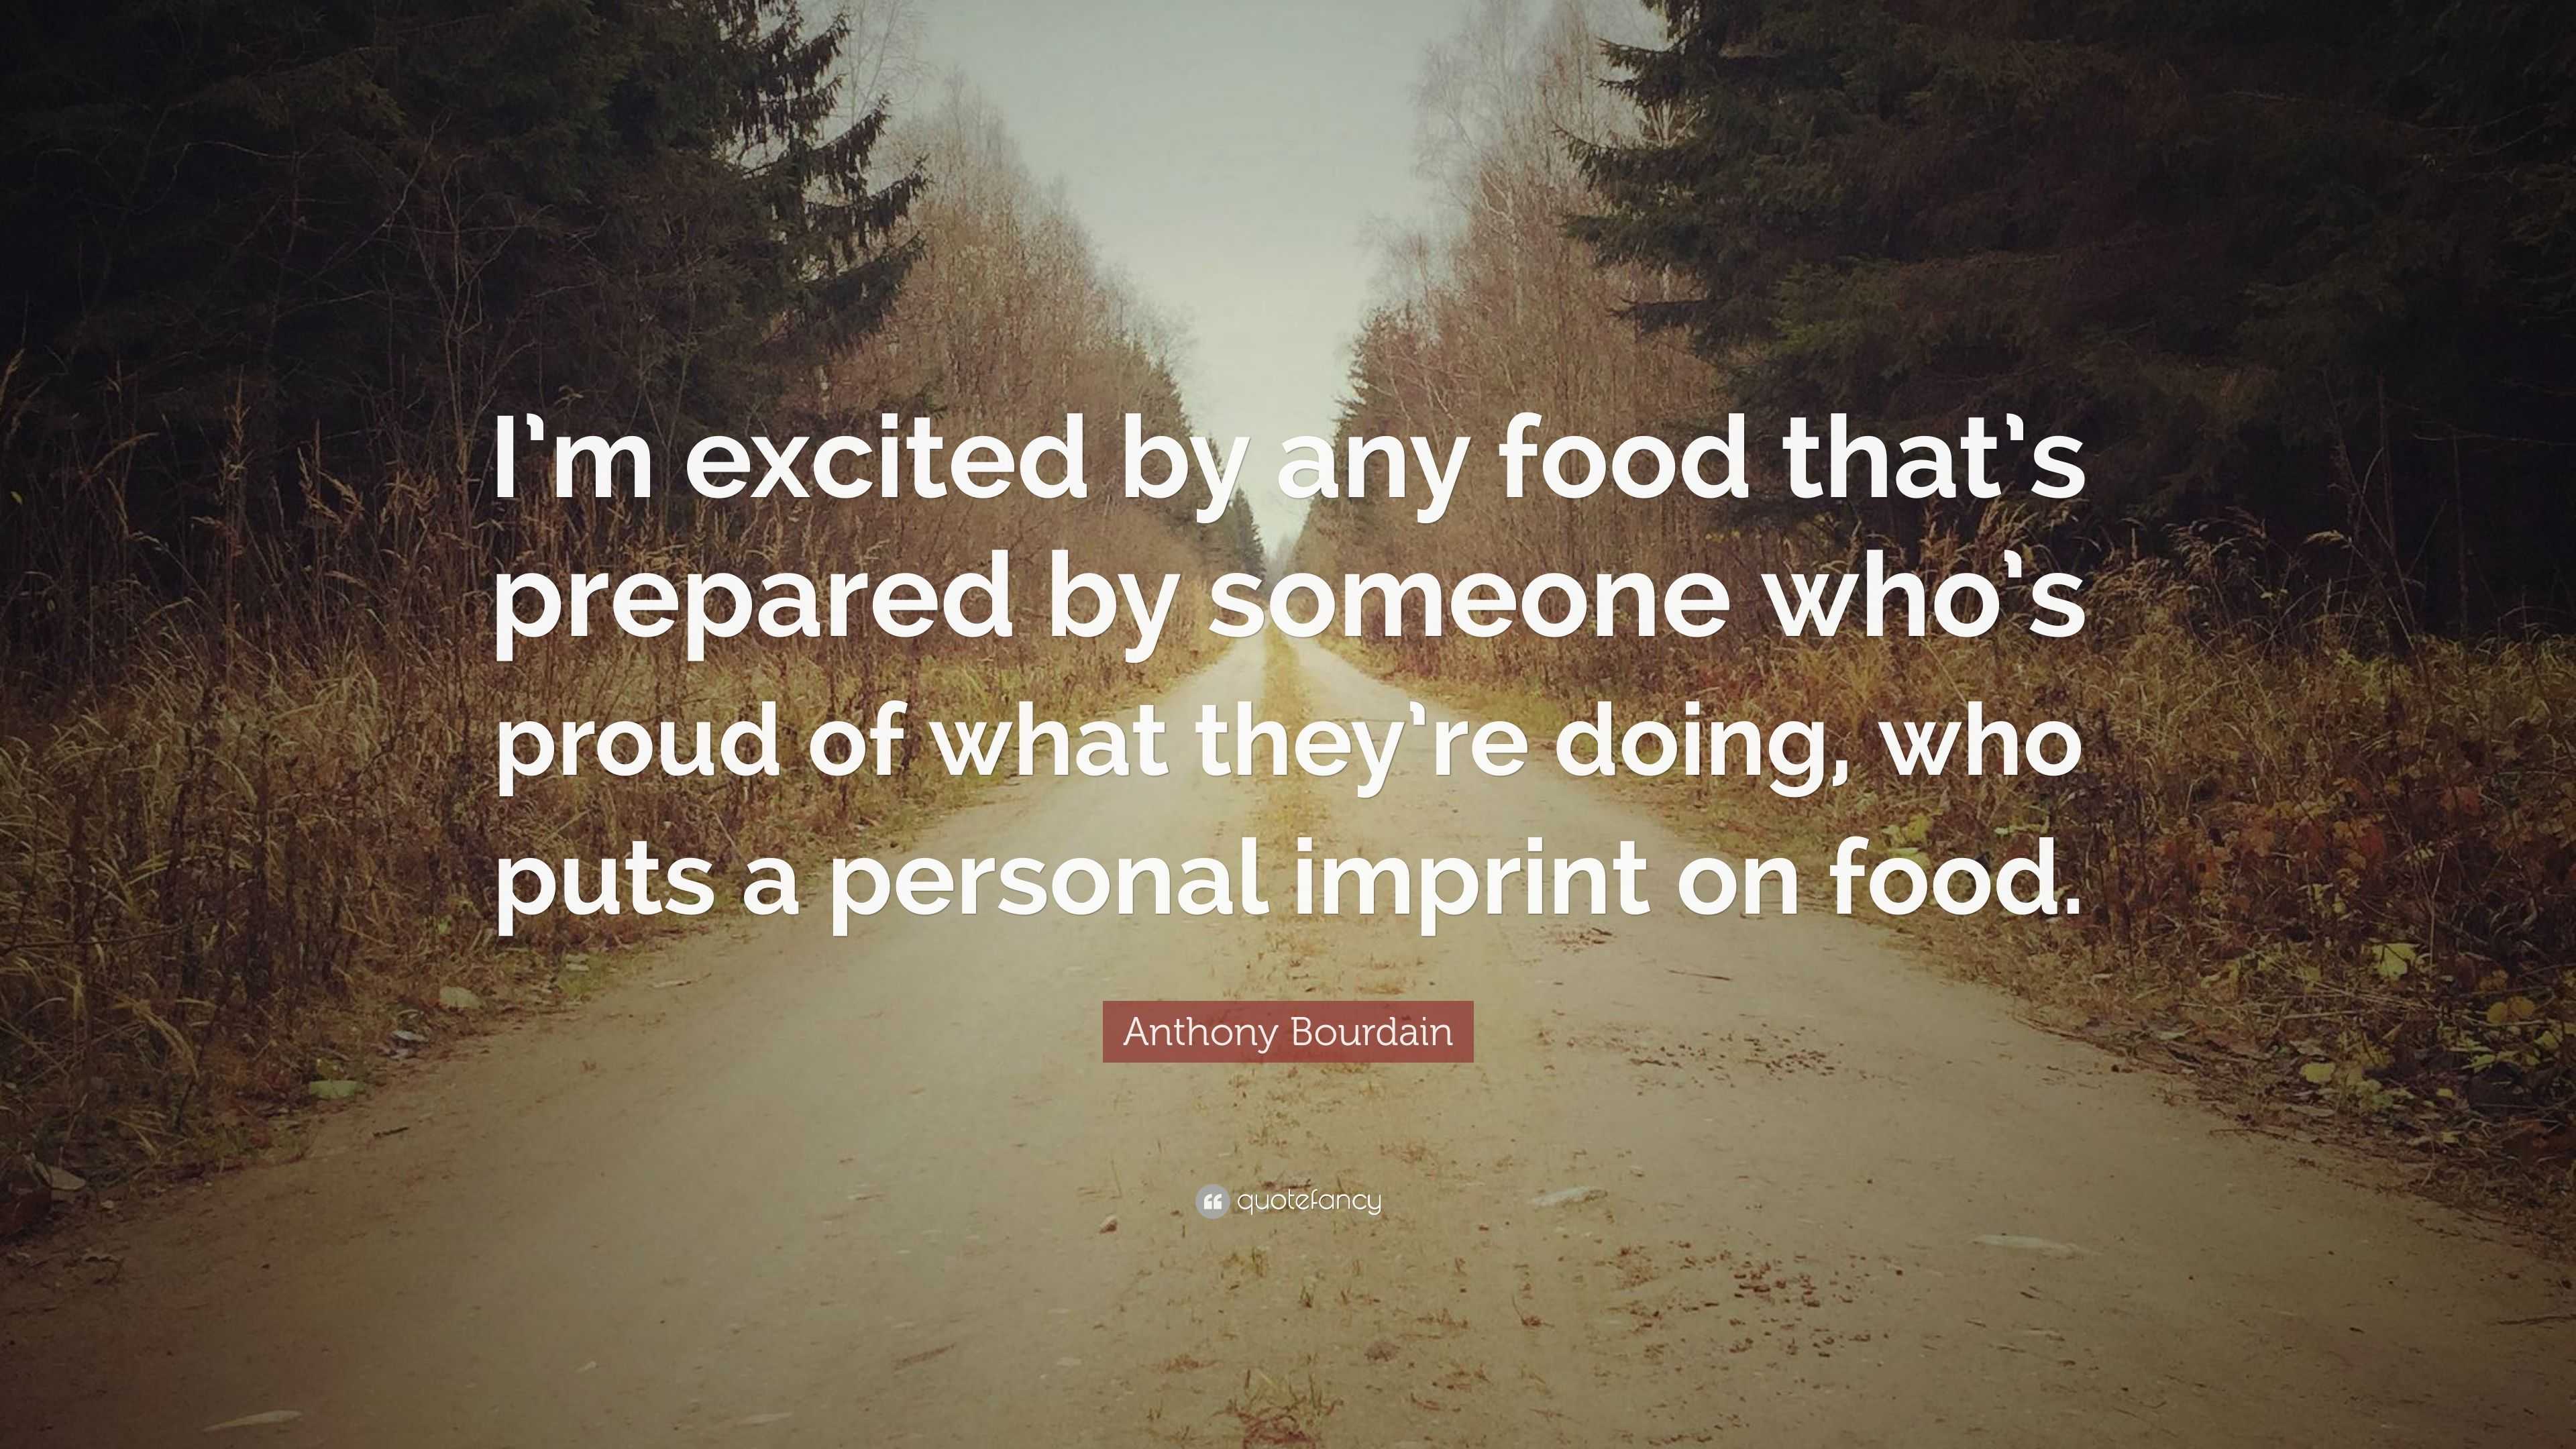 Anthony Bourdain Quote: “I’m excited by any food that’s prepared by